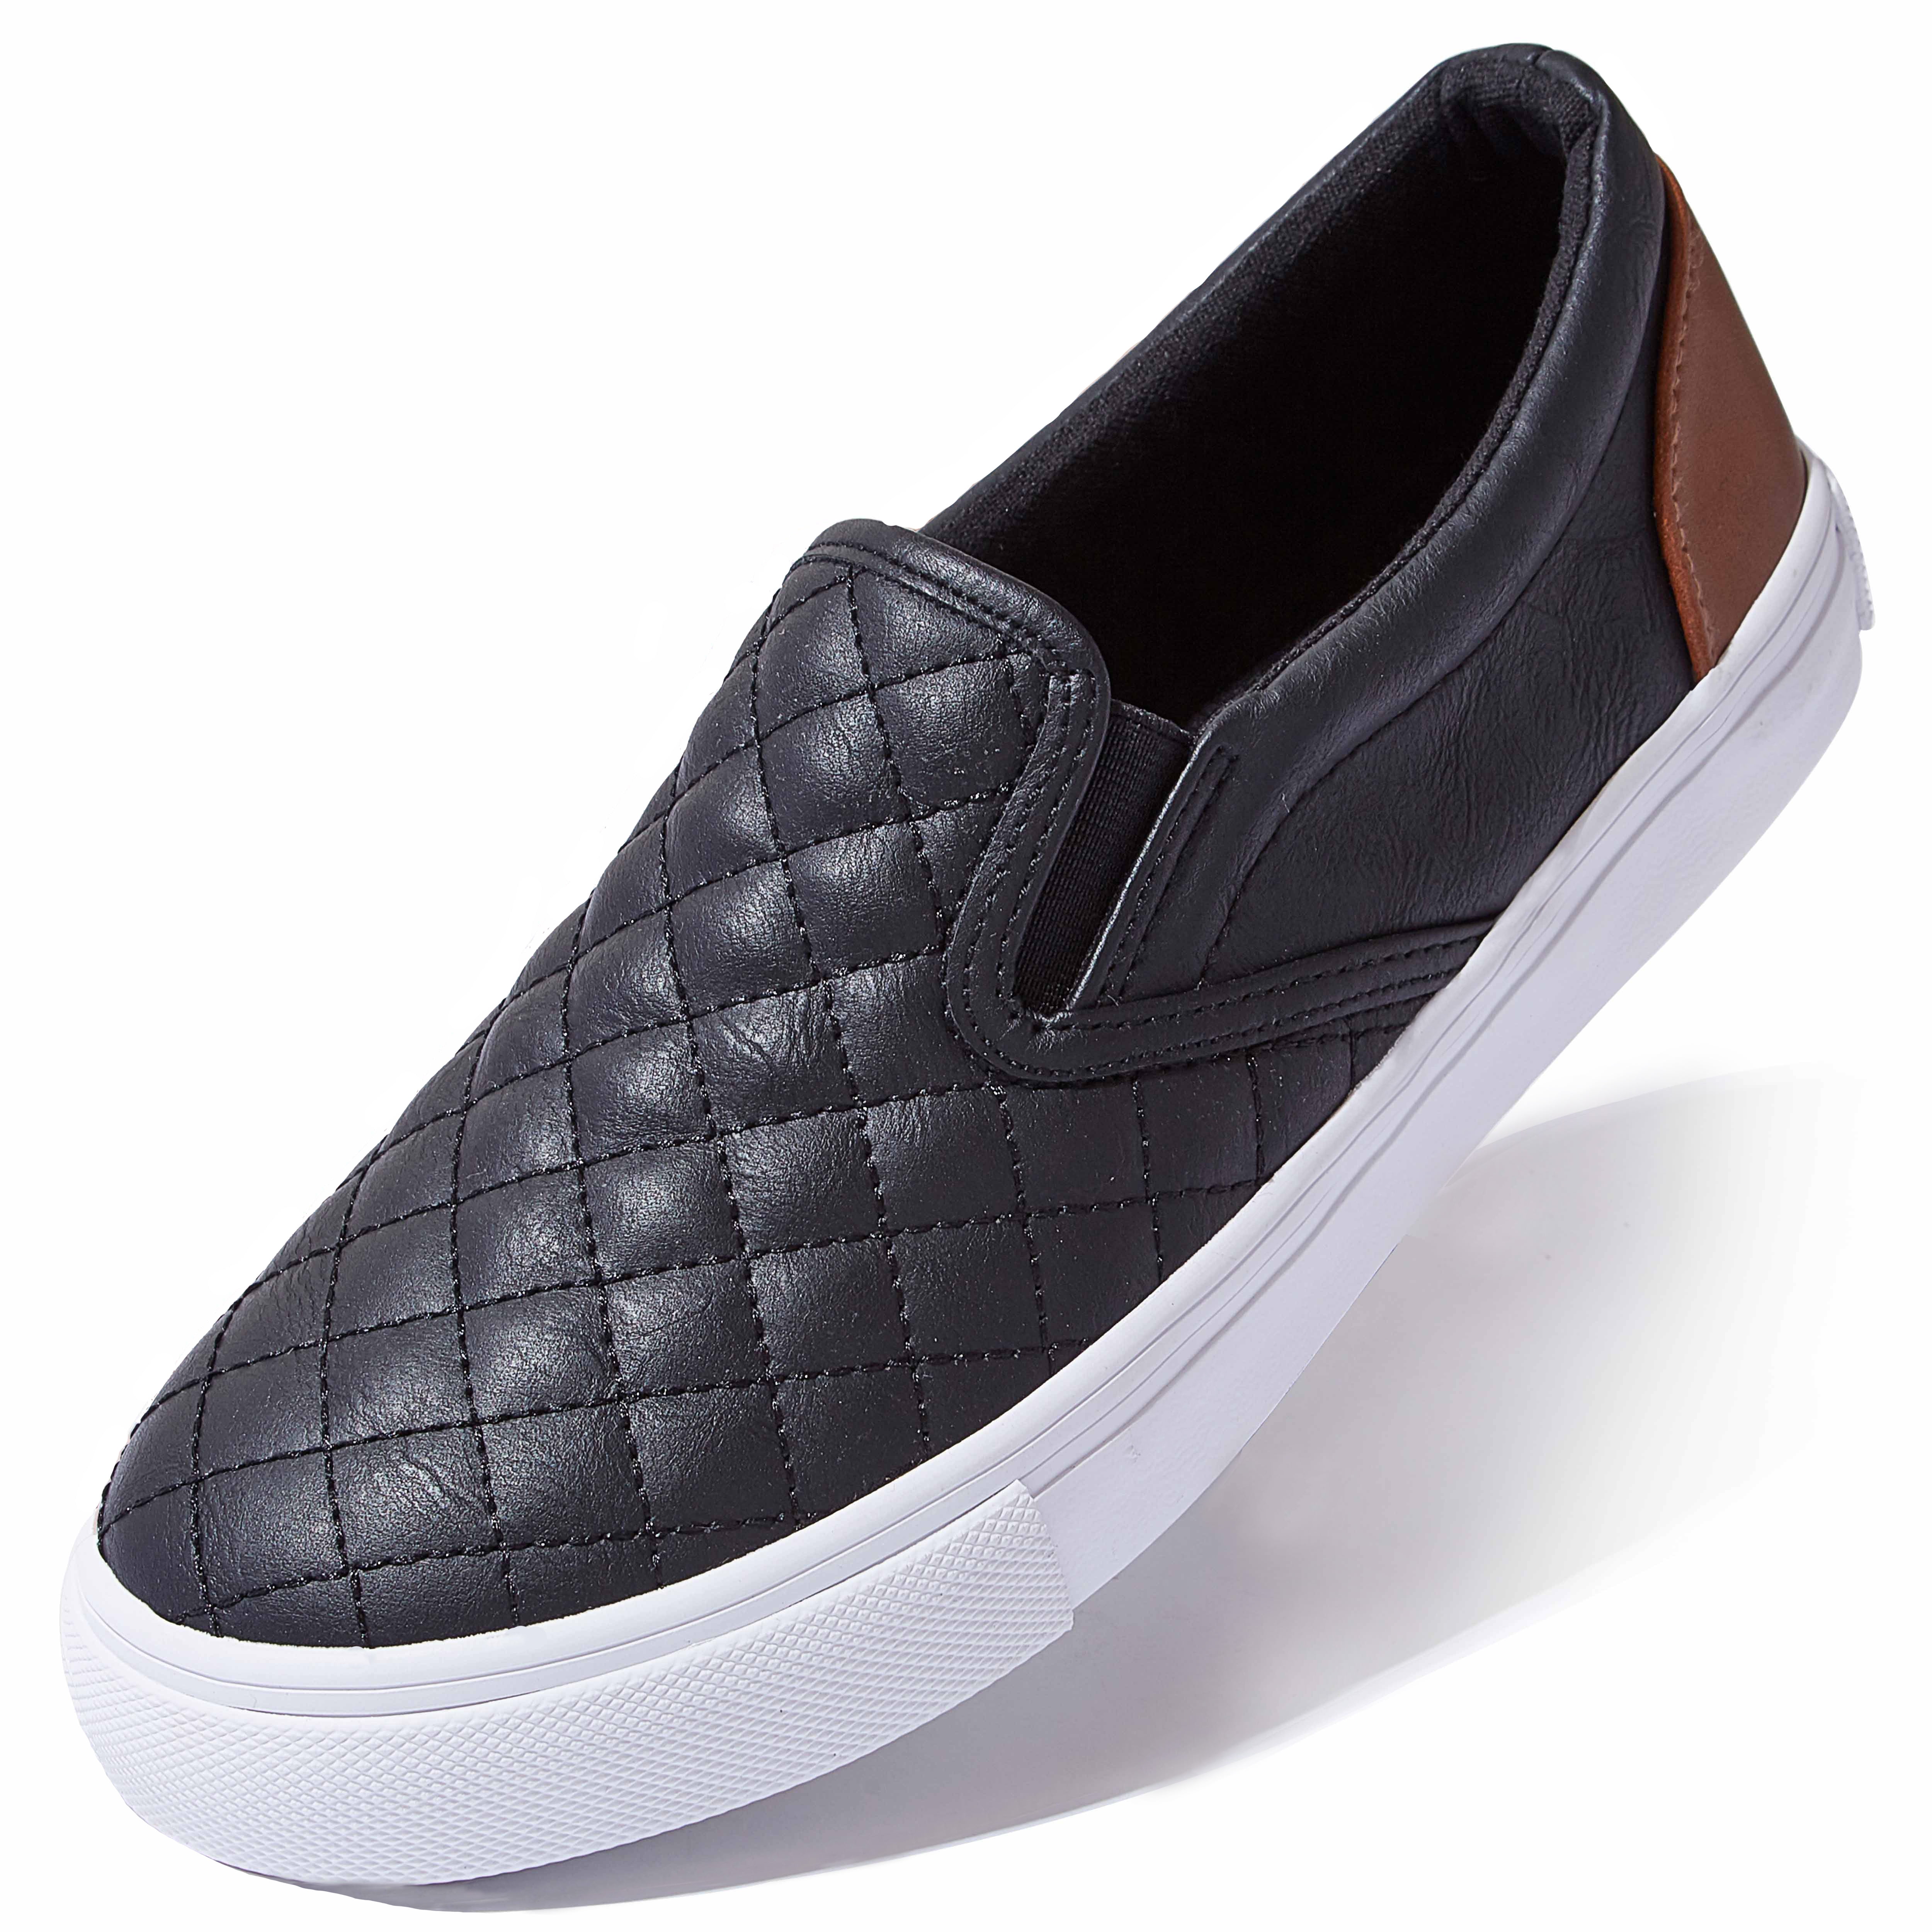 DailyShoes - DailyShoes Quilted Casual Slip-on Sneakers Slip On Hour